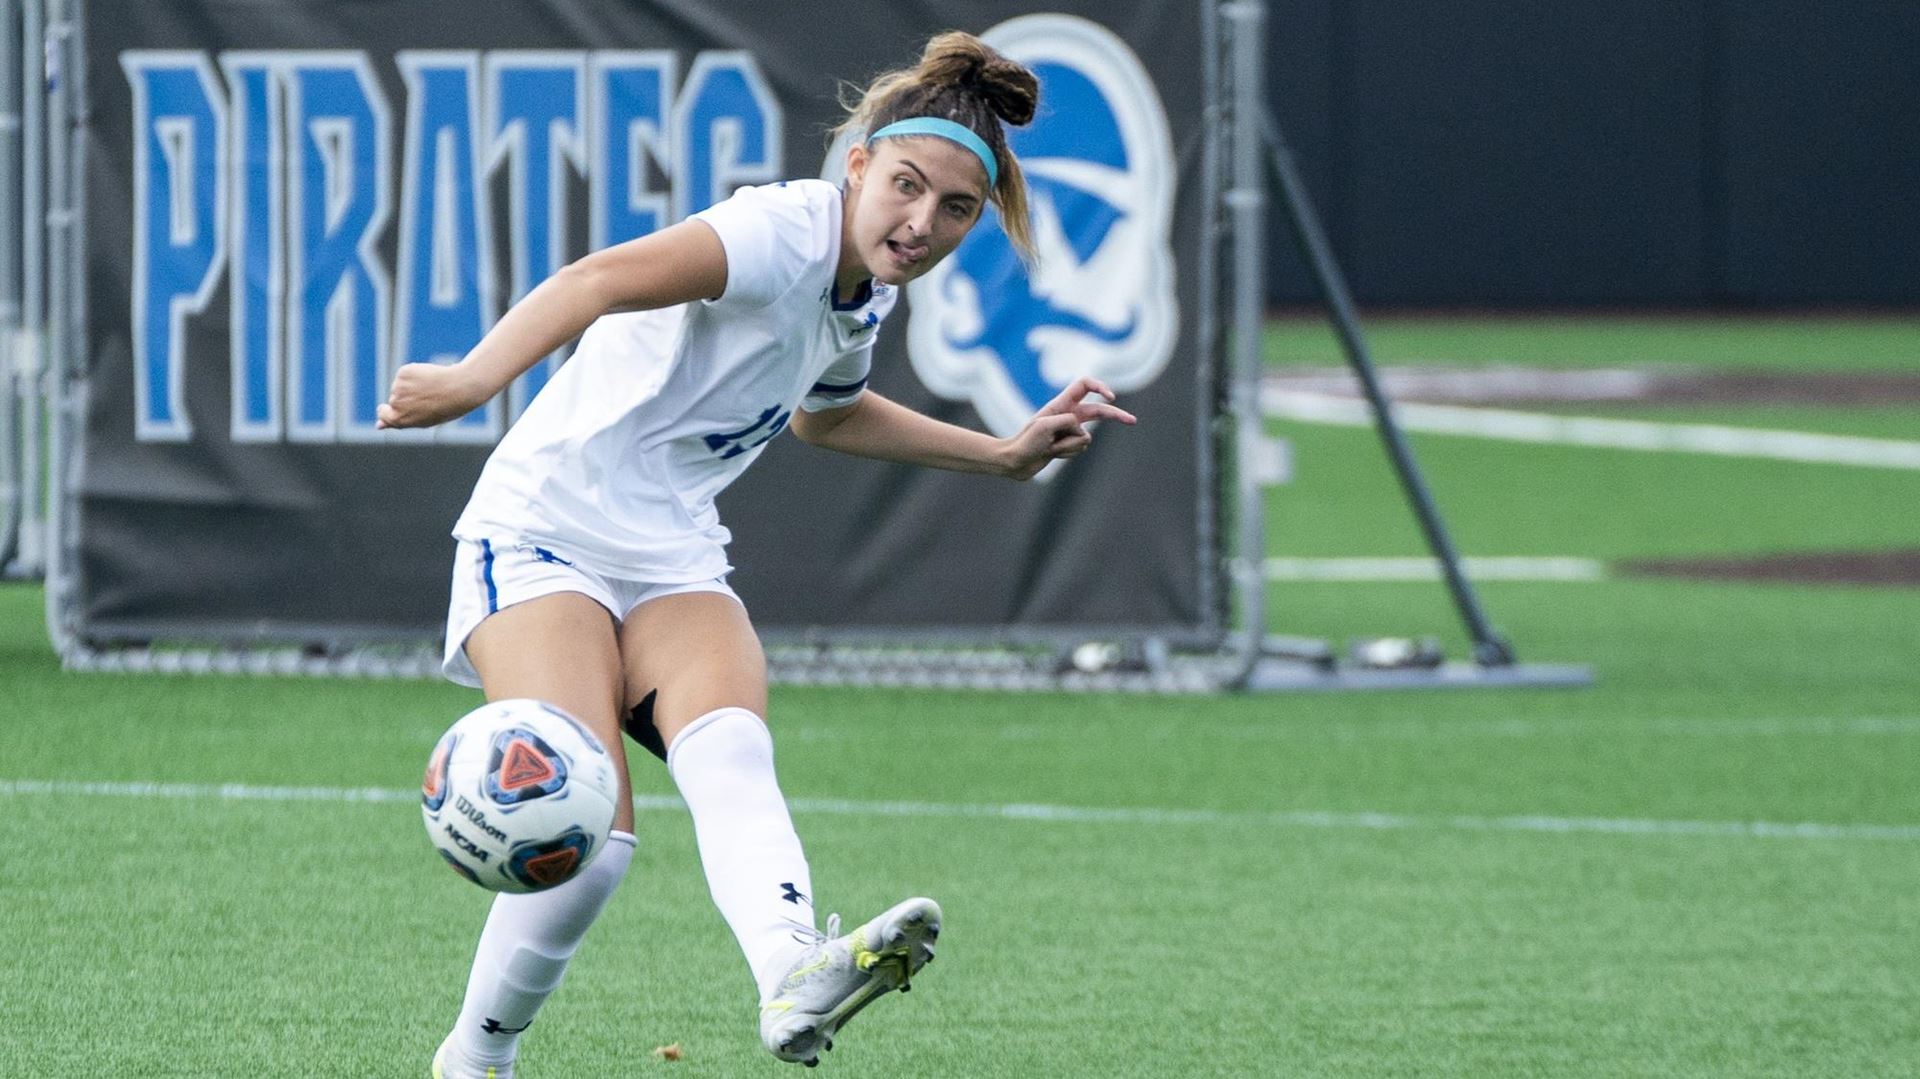 A Seton Hall women's soccer player passes the ball during a home game against Iona.